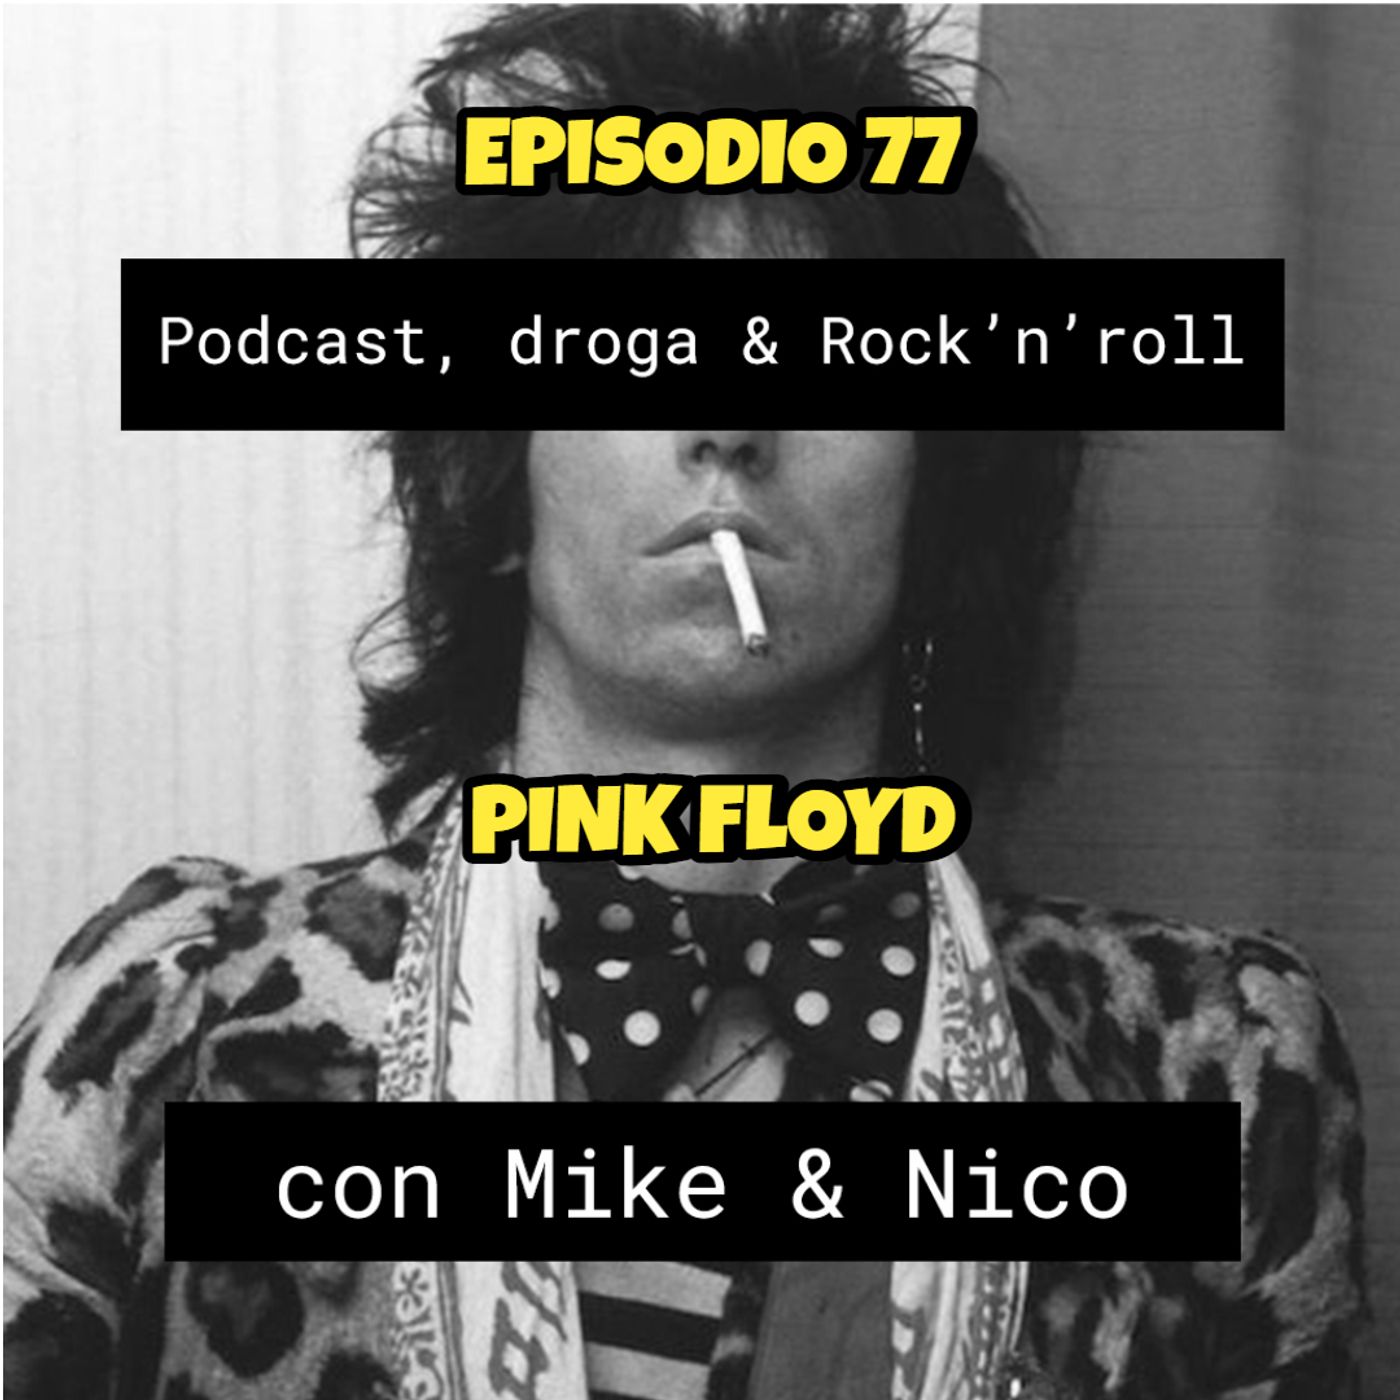 #PDR Episodio 77 - PINK FLOYD -